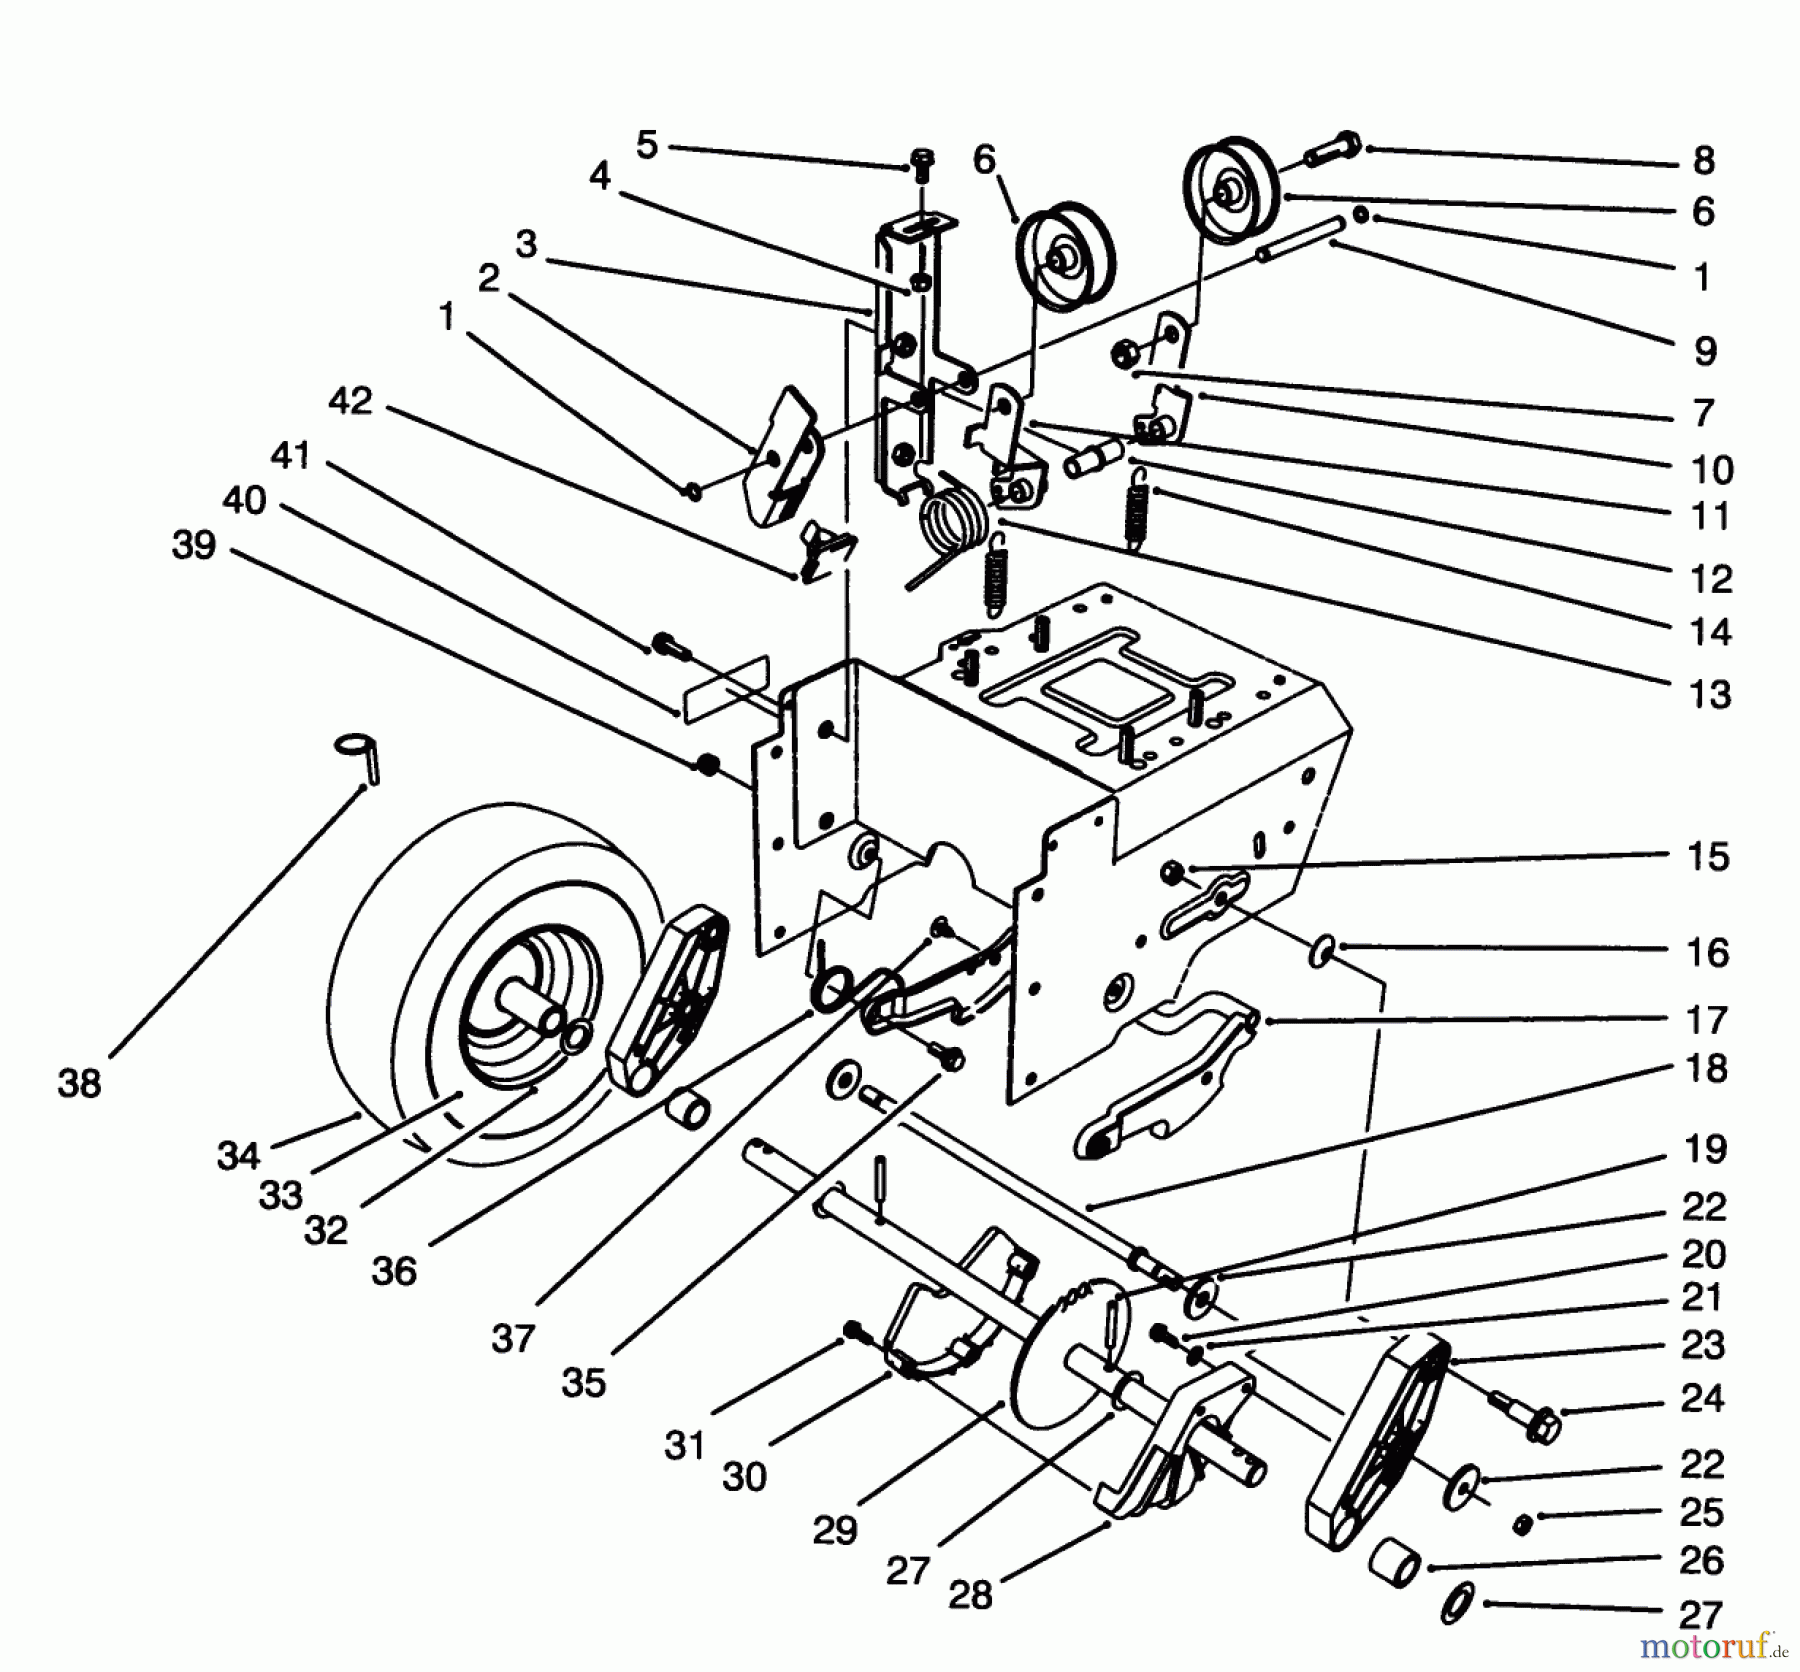  Toro Neu Snow Blowers/Snow Throwers Seite 1 38570 (828) - Toro 828 Power Shift Snowthrower, 1995 (5900001-5999999) TRACTION DRIVE ASSEMBLY